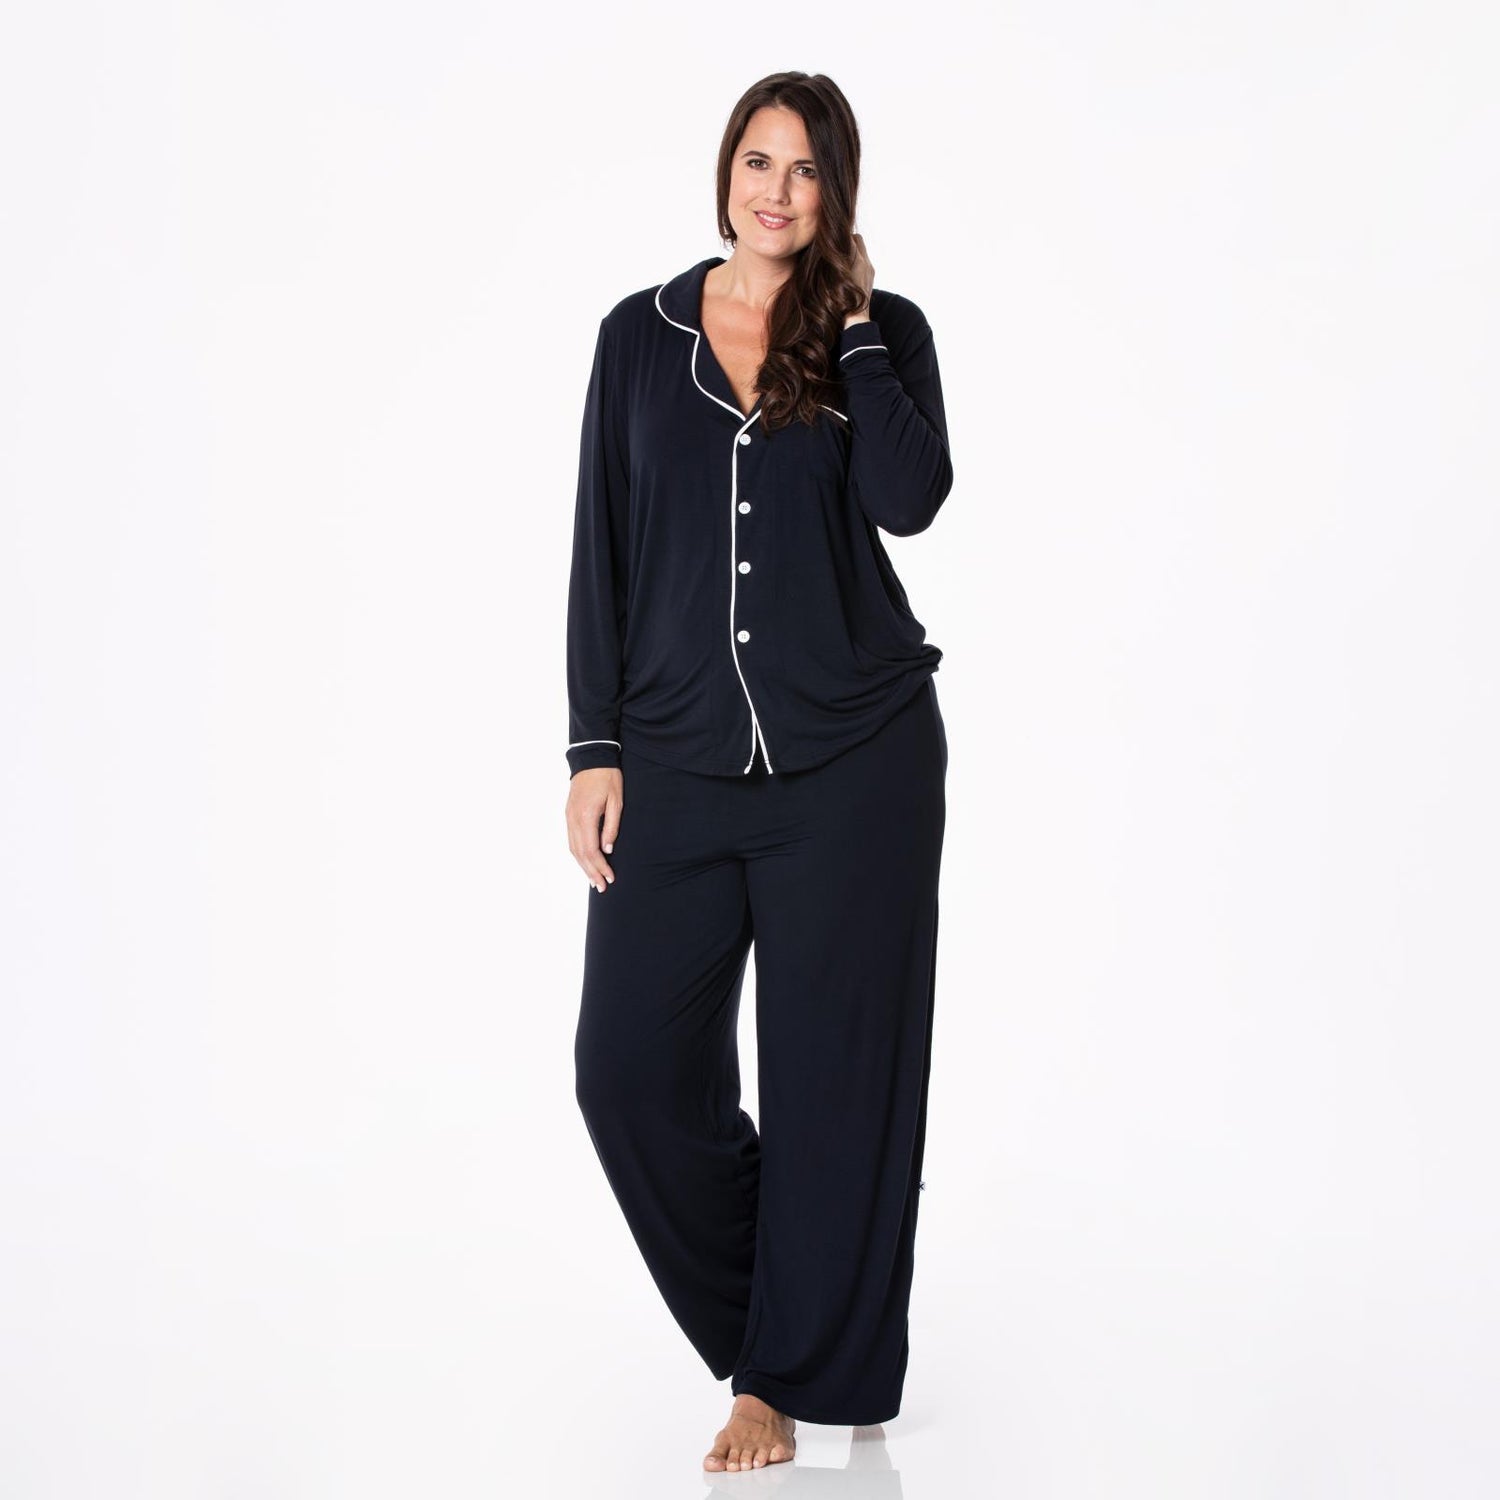 Women's Solid Long Sleeved Collared Pajama Set in Deep Space with Natural